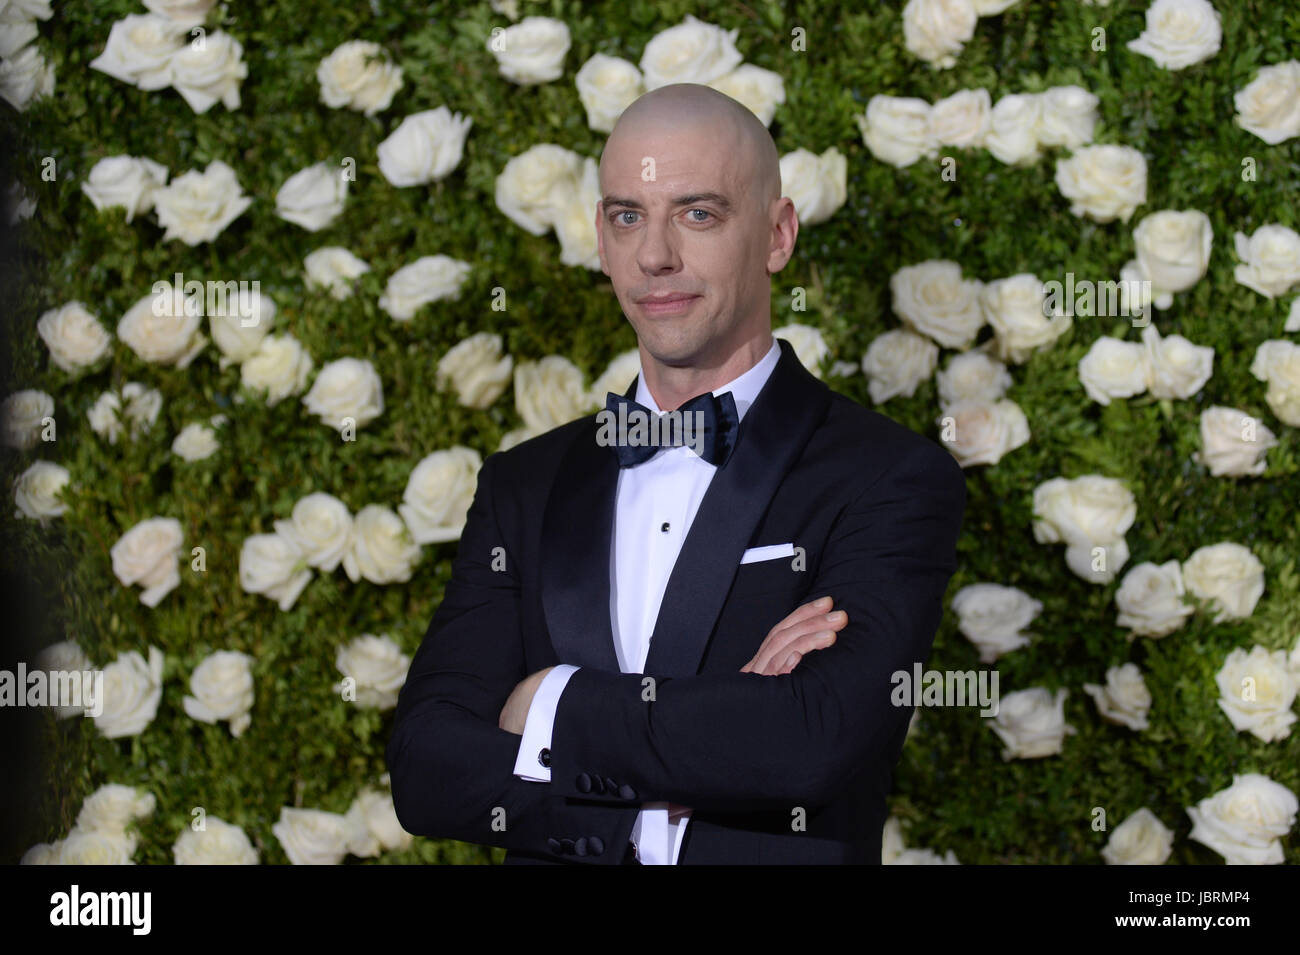 New York, USA. 11th Jun, 2017. Christian Borle attends the 2017 Tony Awards at Radio City Music Hall on June 11, 2017 in New York City. Credit: Erik Pendzich/Alamy Live News Stock Photo